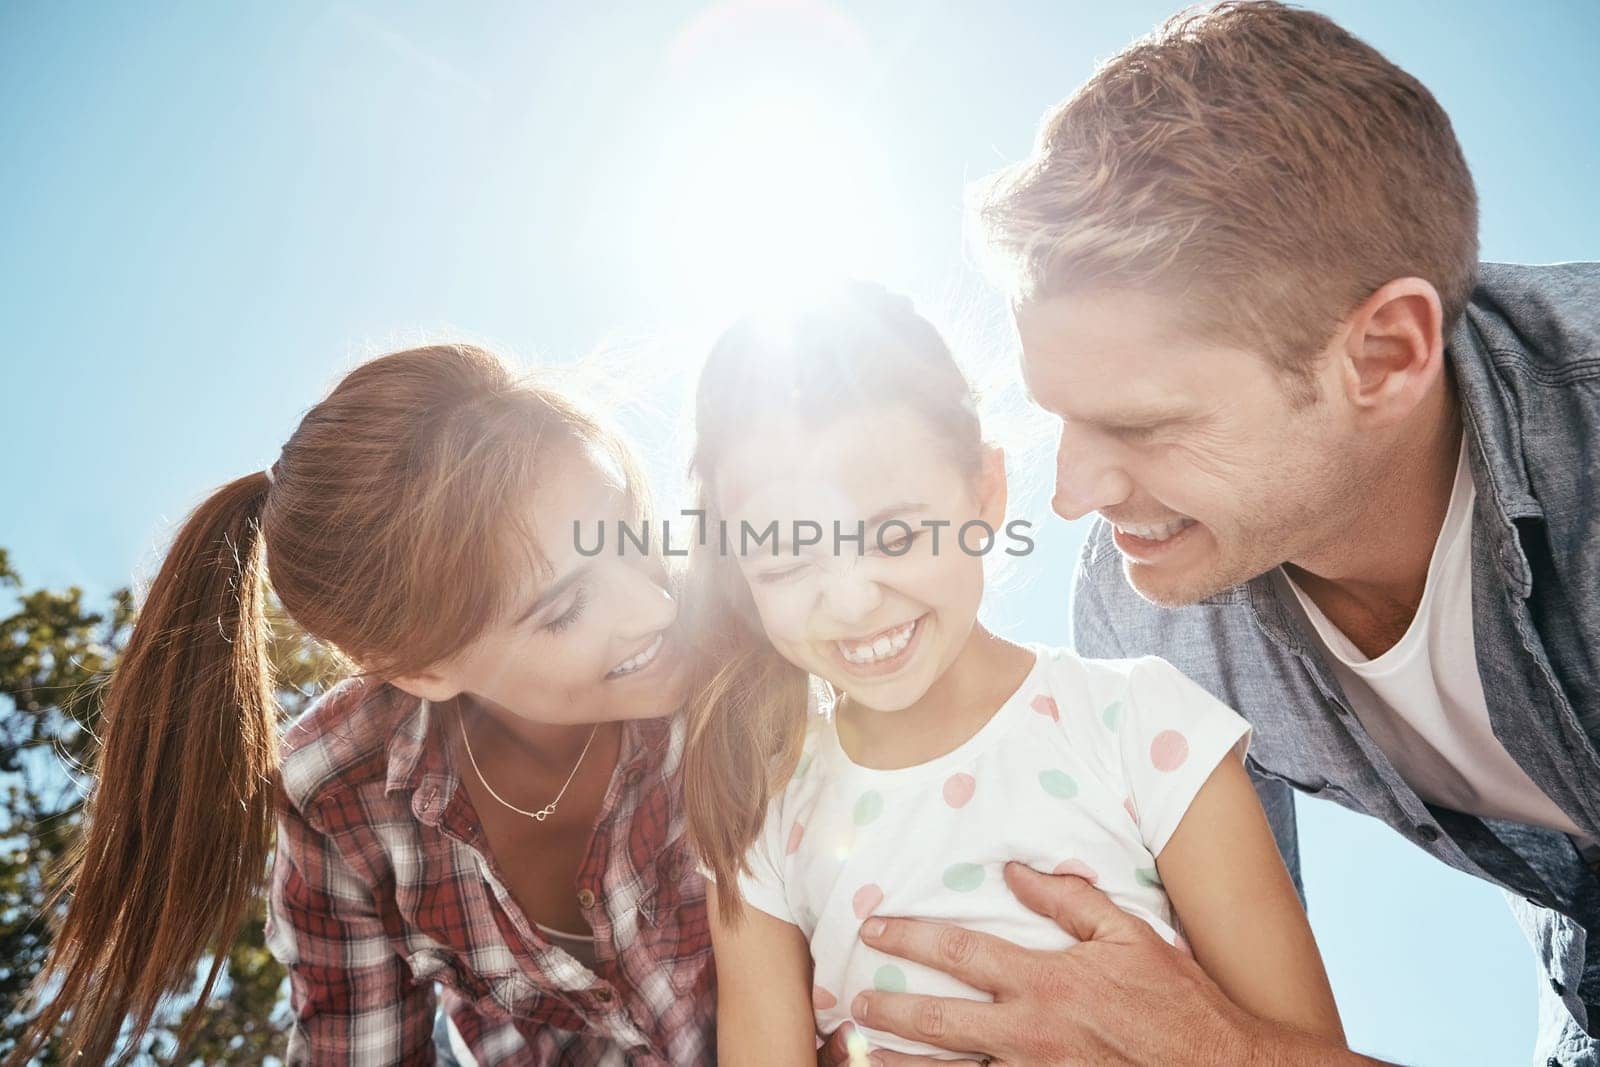 Enjoying some bright moments. a family bonding together outdoors. by YuriArcurs